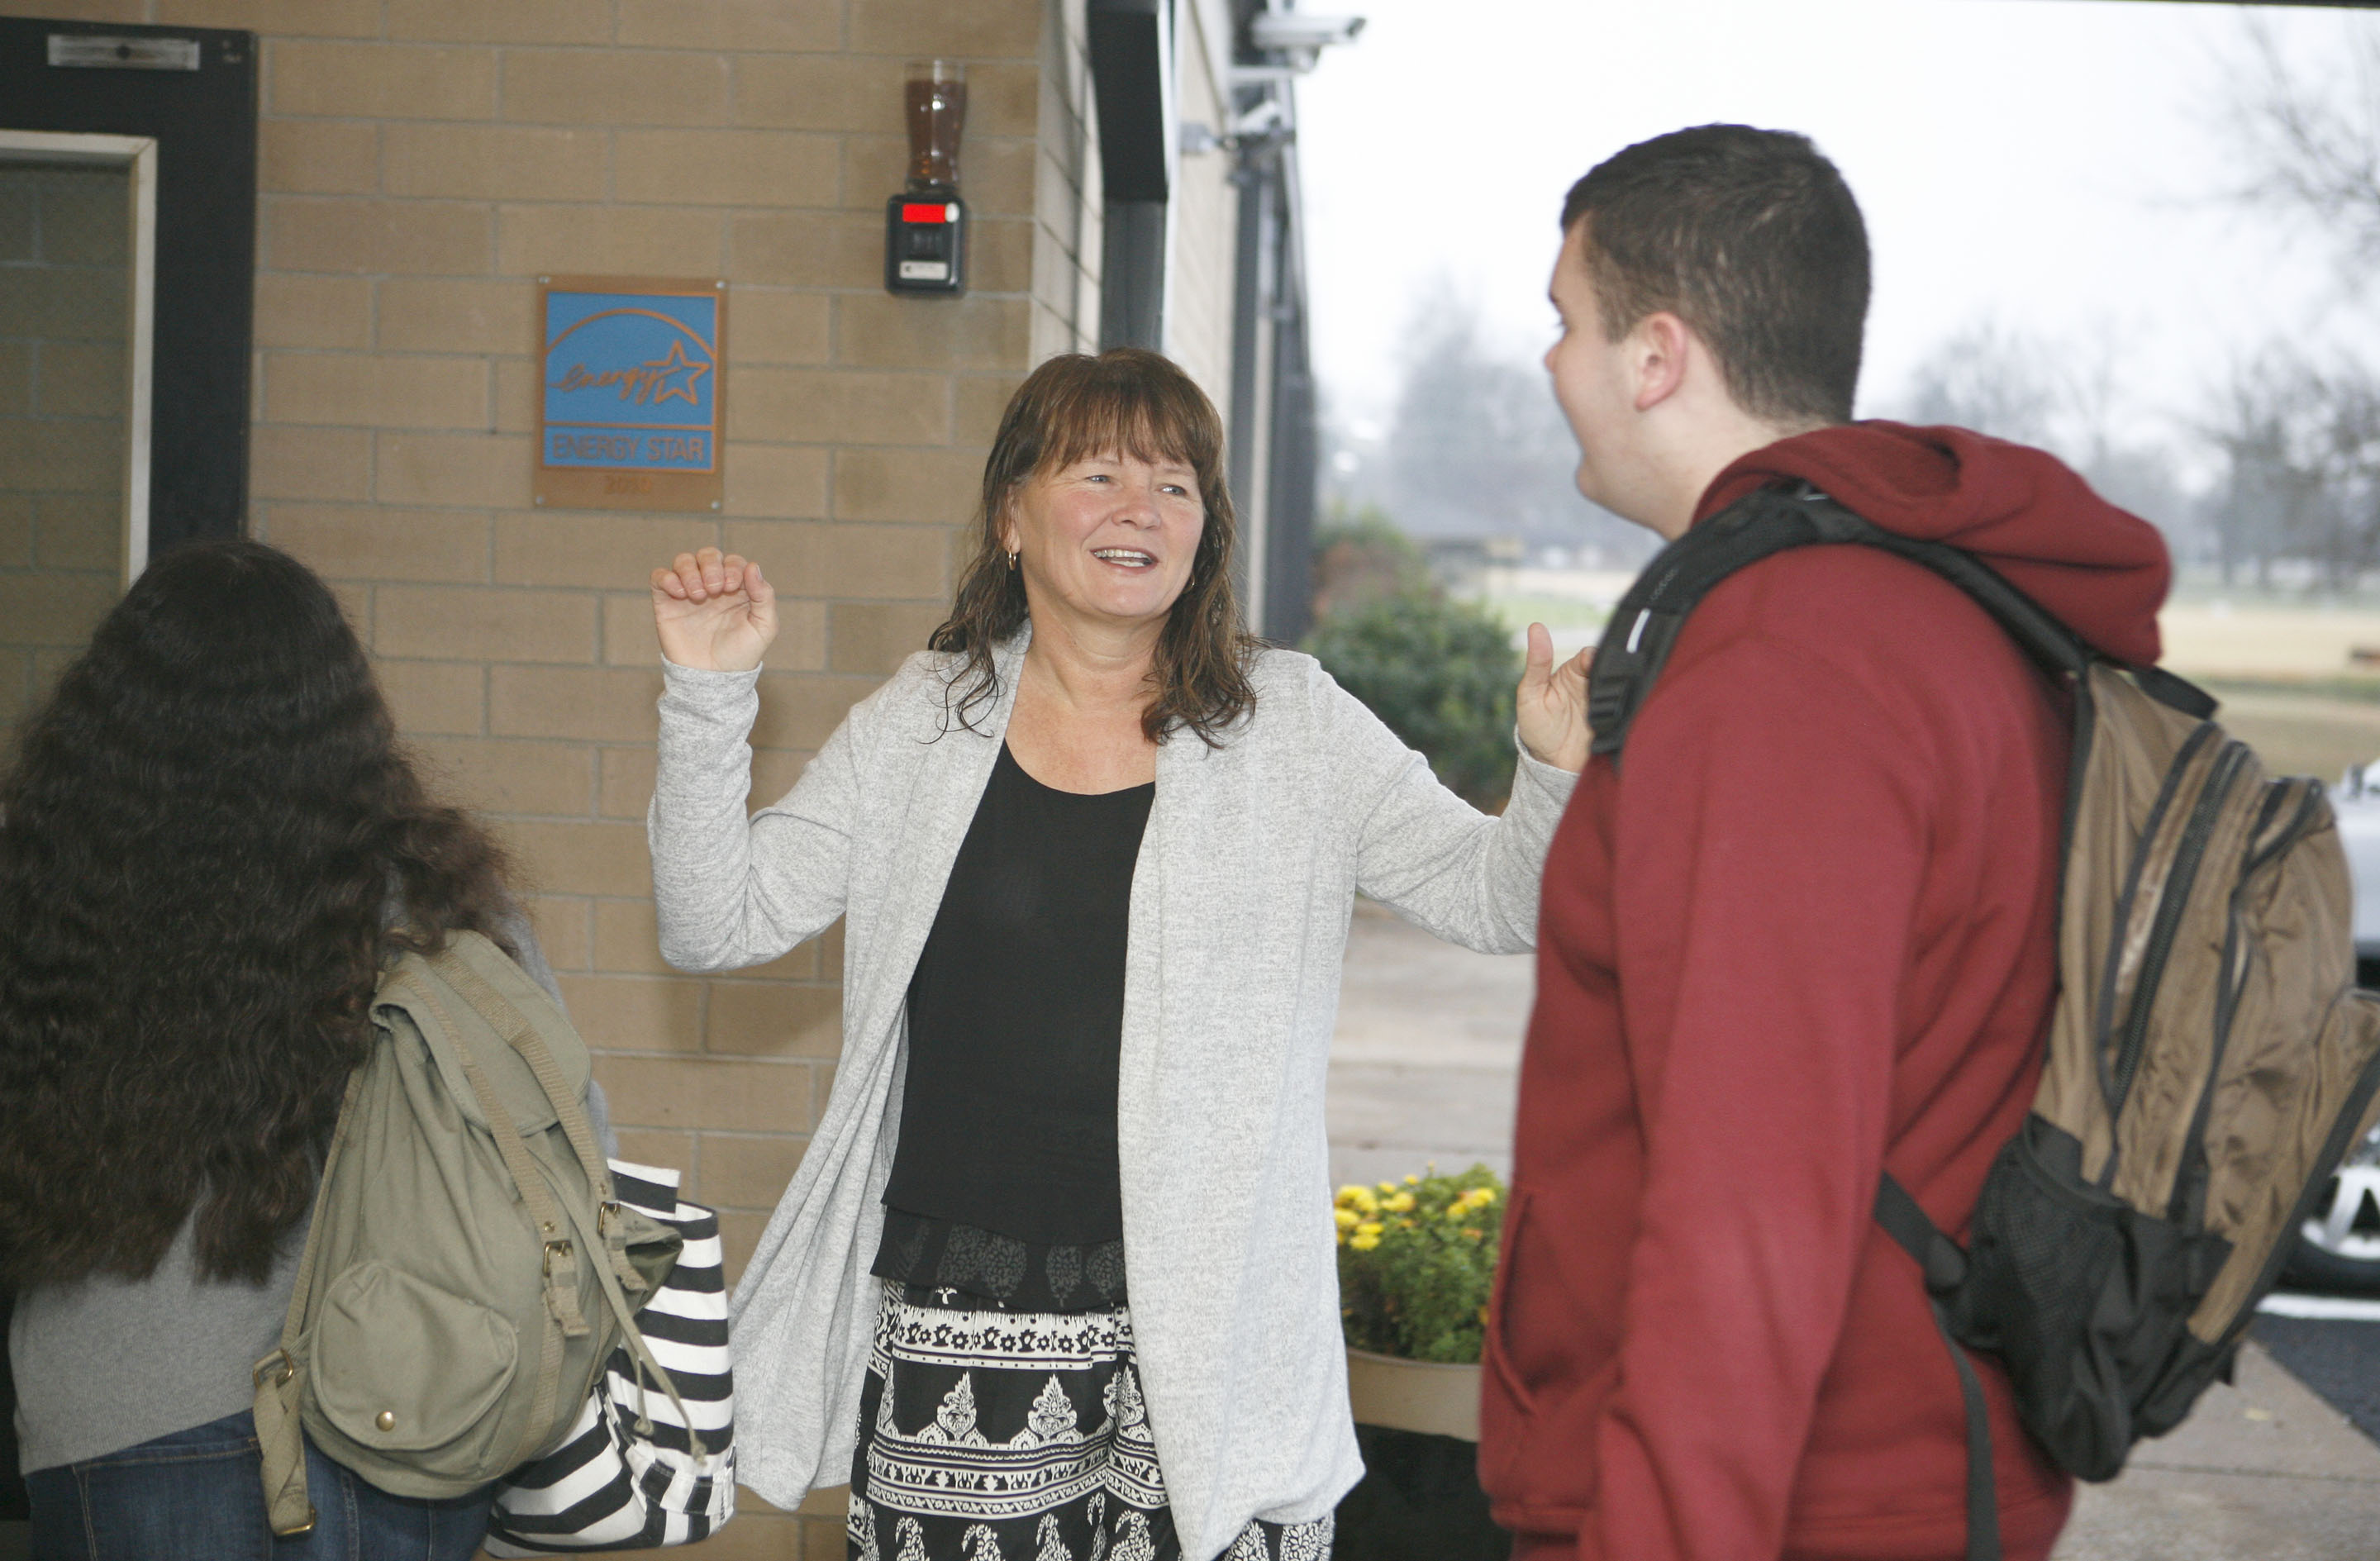 Teresa Speed, principal at Murray High School (Murray Independent), greets students with a hug as they enter the building to start the school day. Speed hugs her students each morning, saying it helps her build relationships with students that are critical to their success. Murray was named a 2015 National Blue Ribbon School by the U.S. Department of Education. Photo by Mike Marsee, Dec. 11, 2015